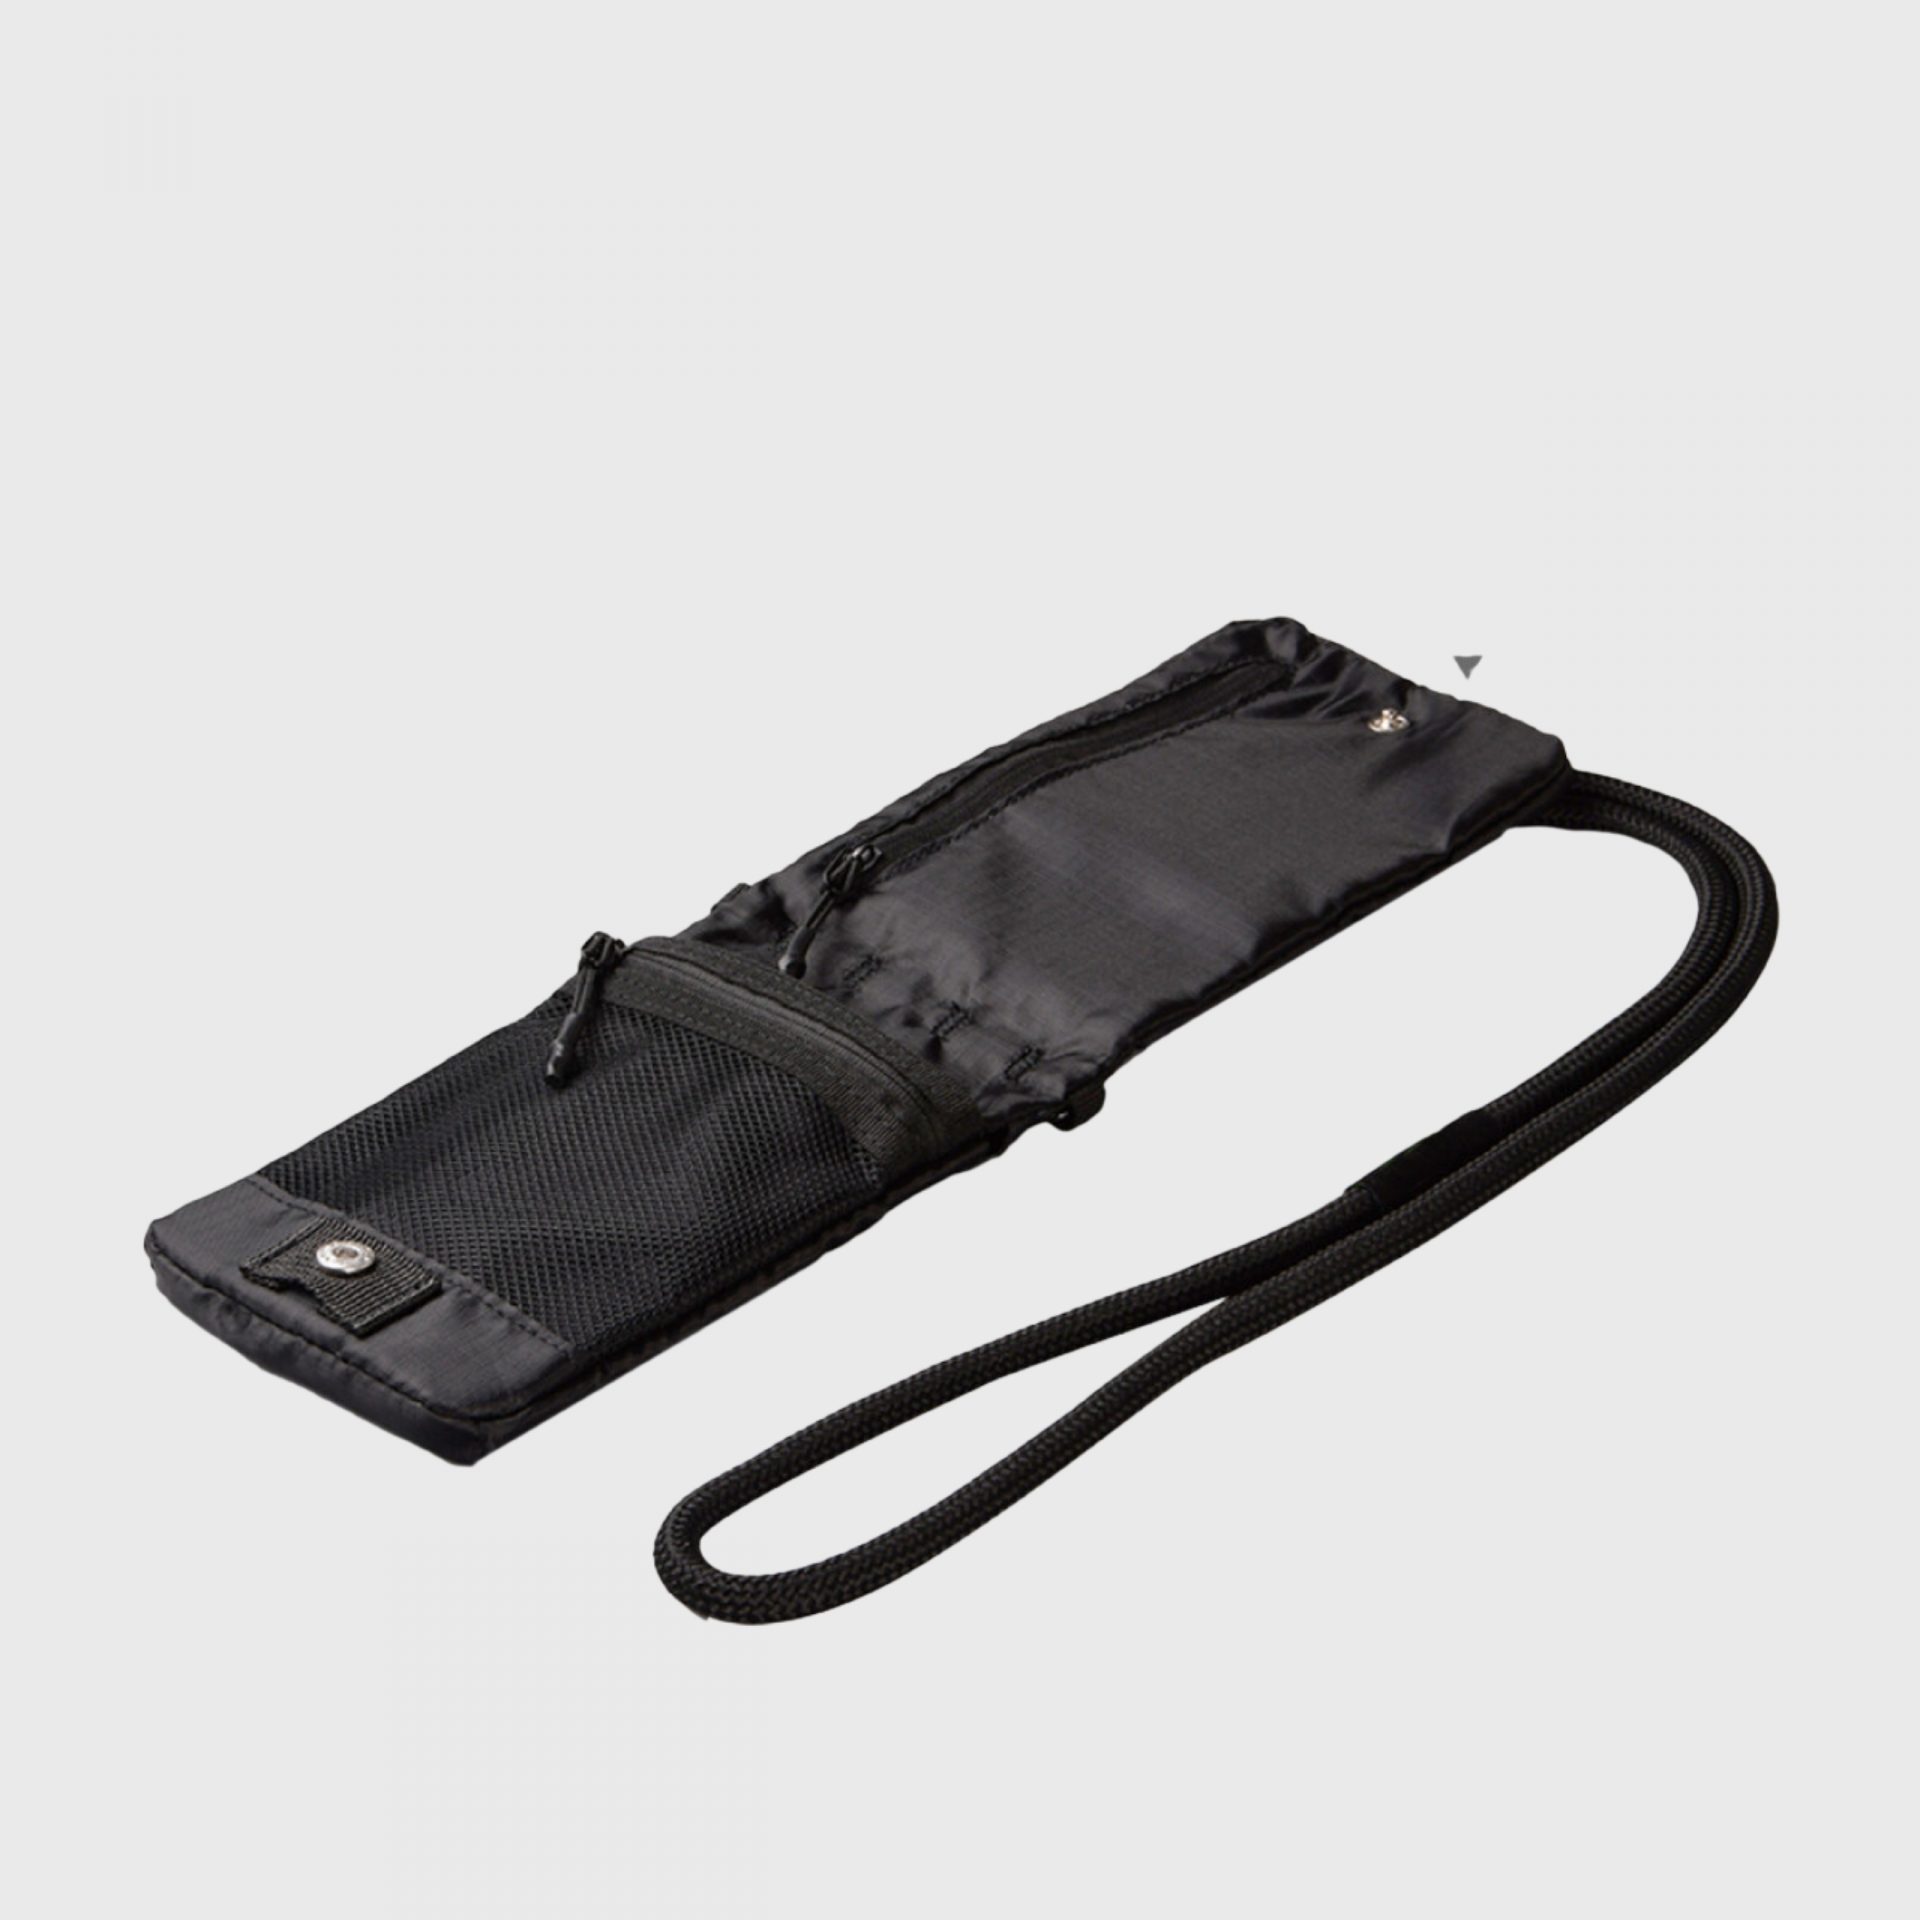 Sustainable Corporate Gifts Singapore Phone Sacoche Pouch Made From Recycled PET Plastic interior